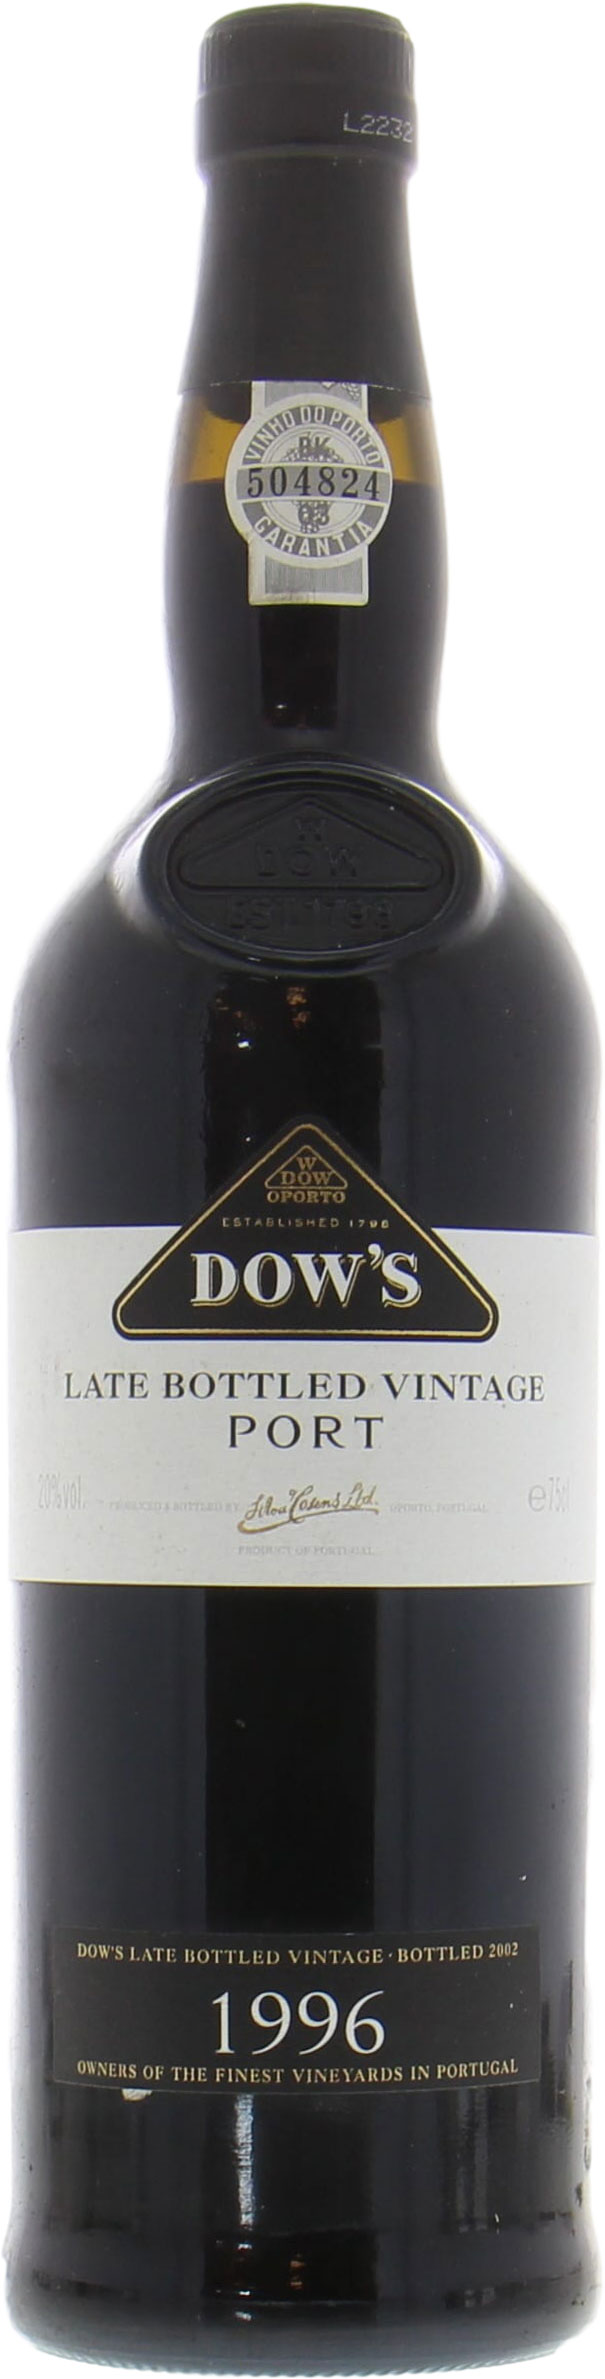 Dow's - Late Bottled Vintage Port 1996 Perfect